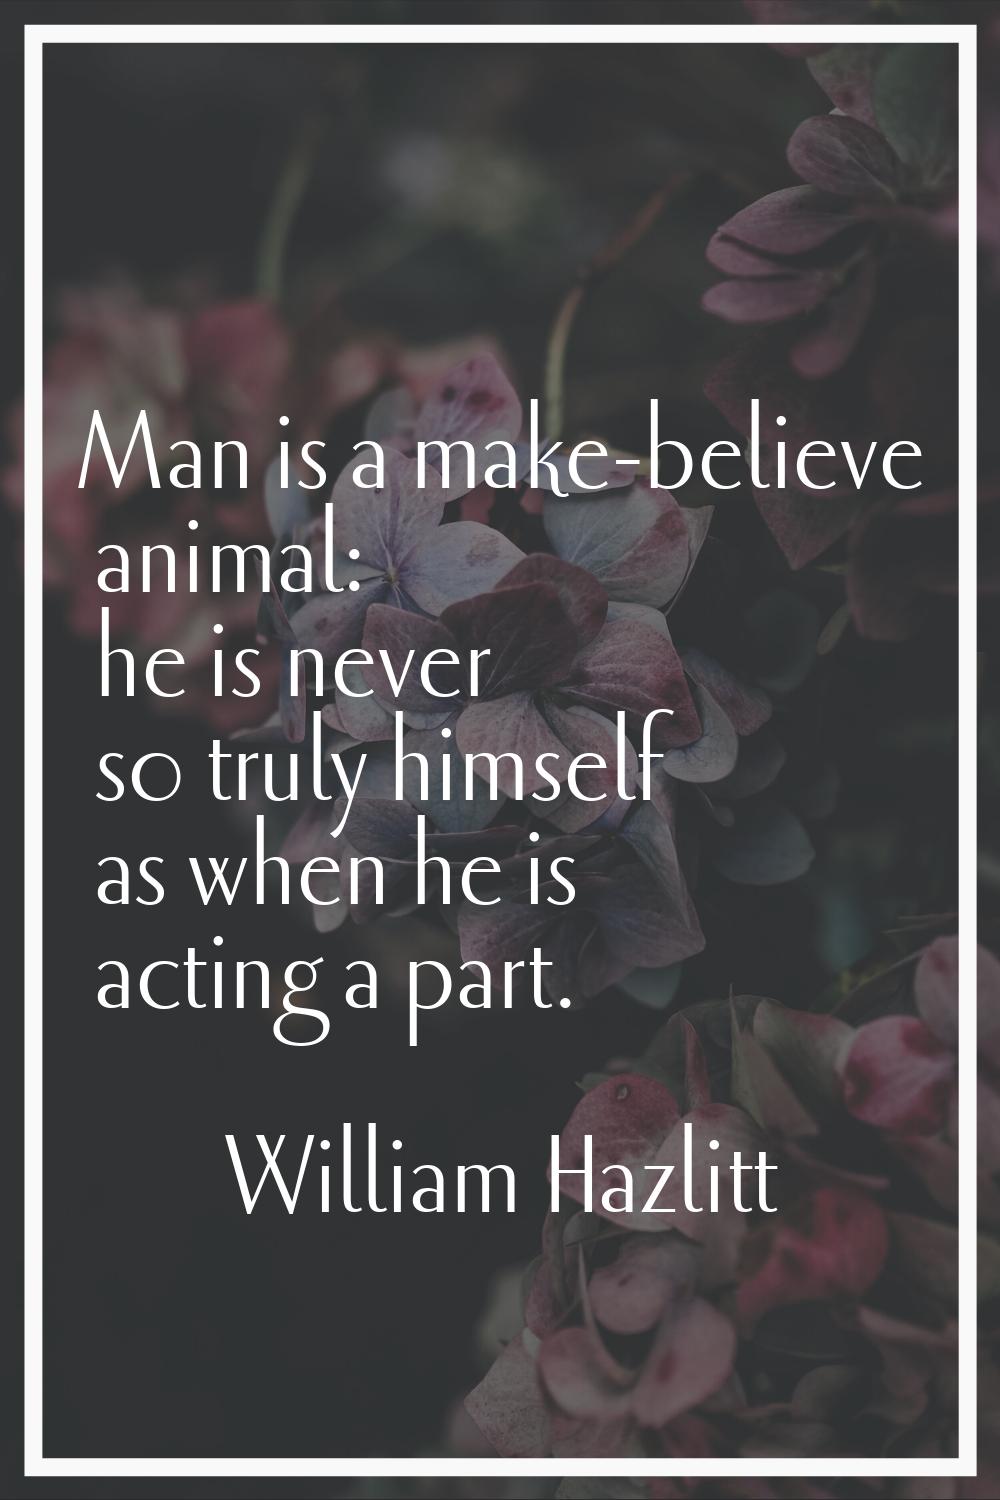 Man is a make-believe animal: he is never so truly himself as when he is acting a part.